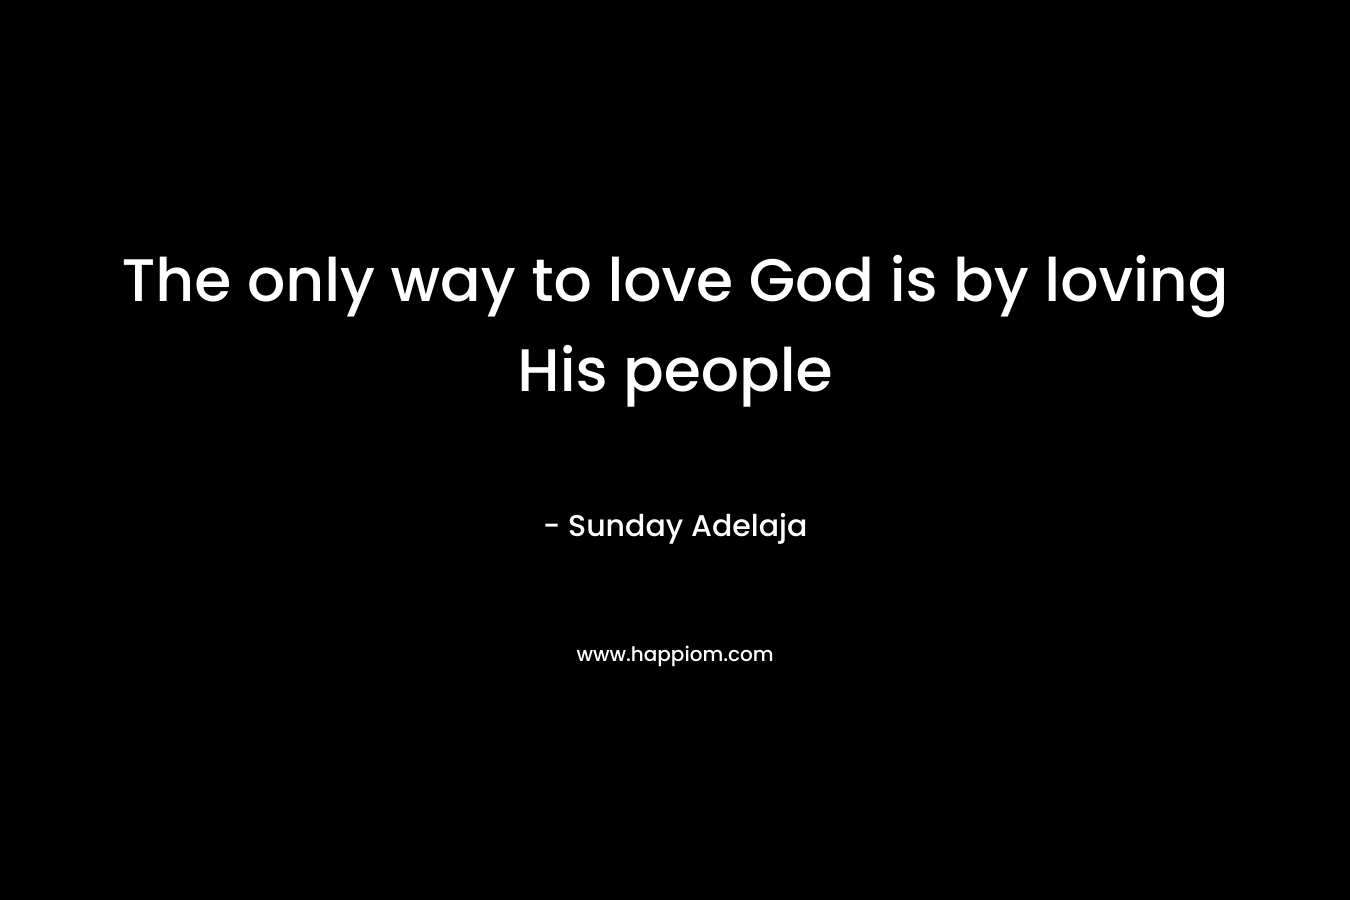 The only way to love God is by loving His people